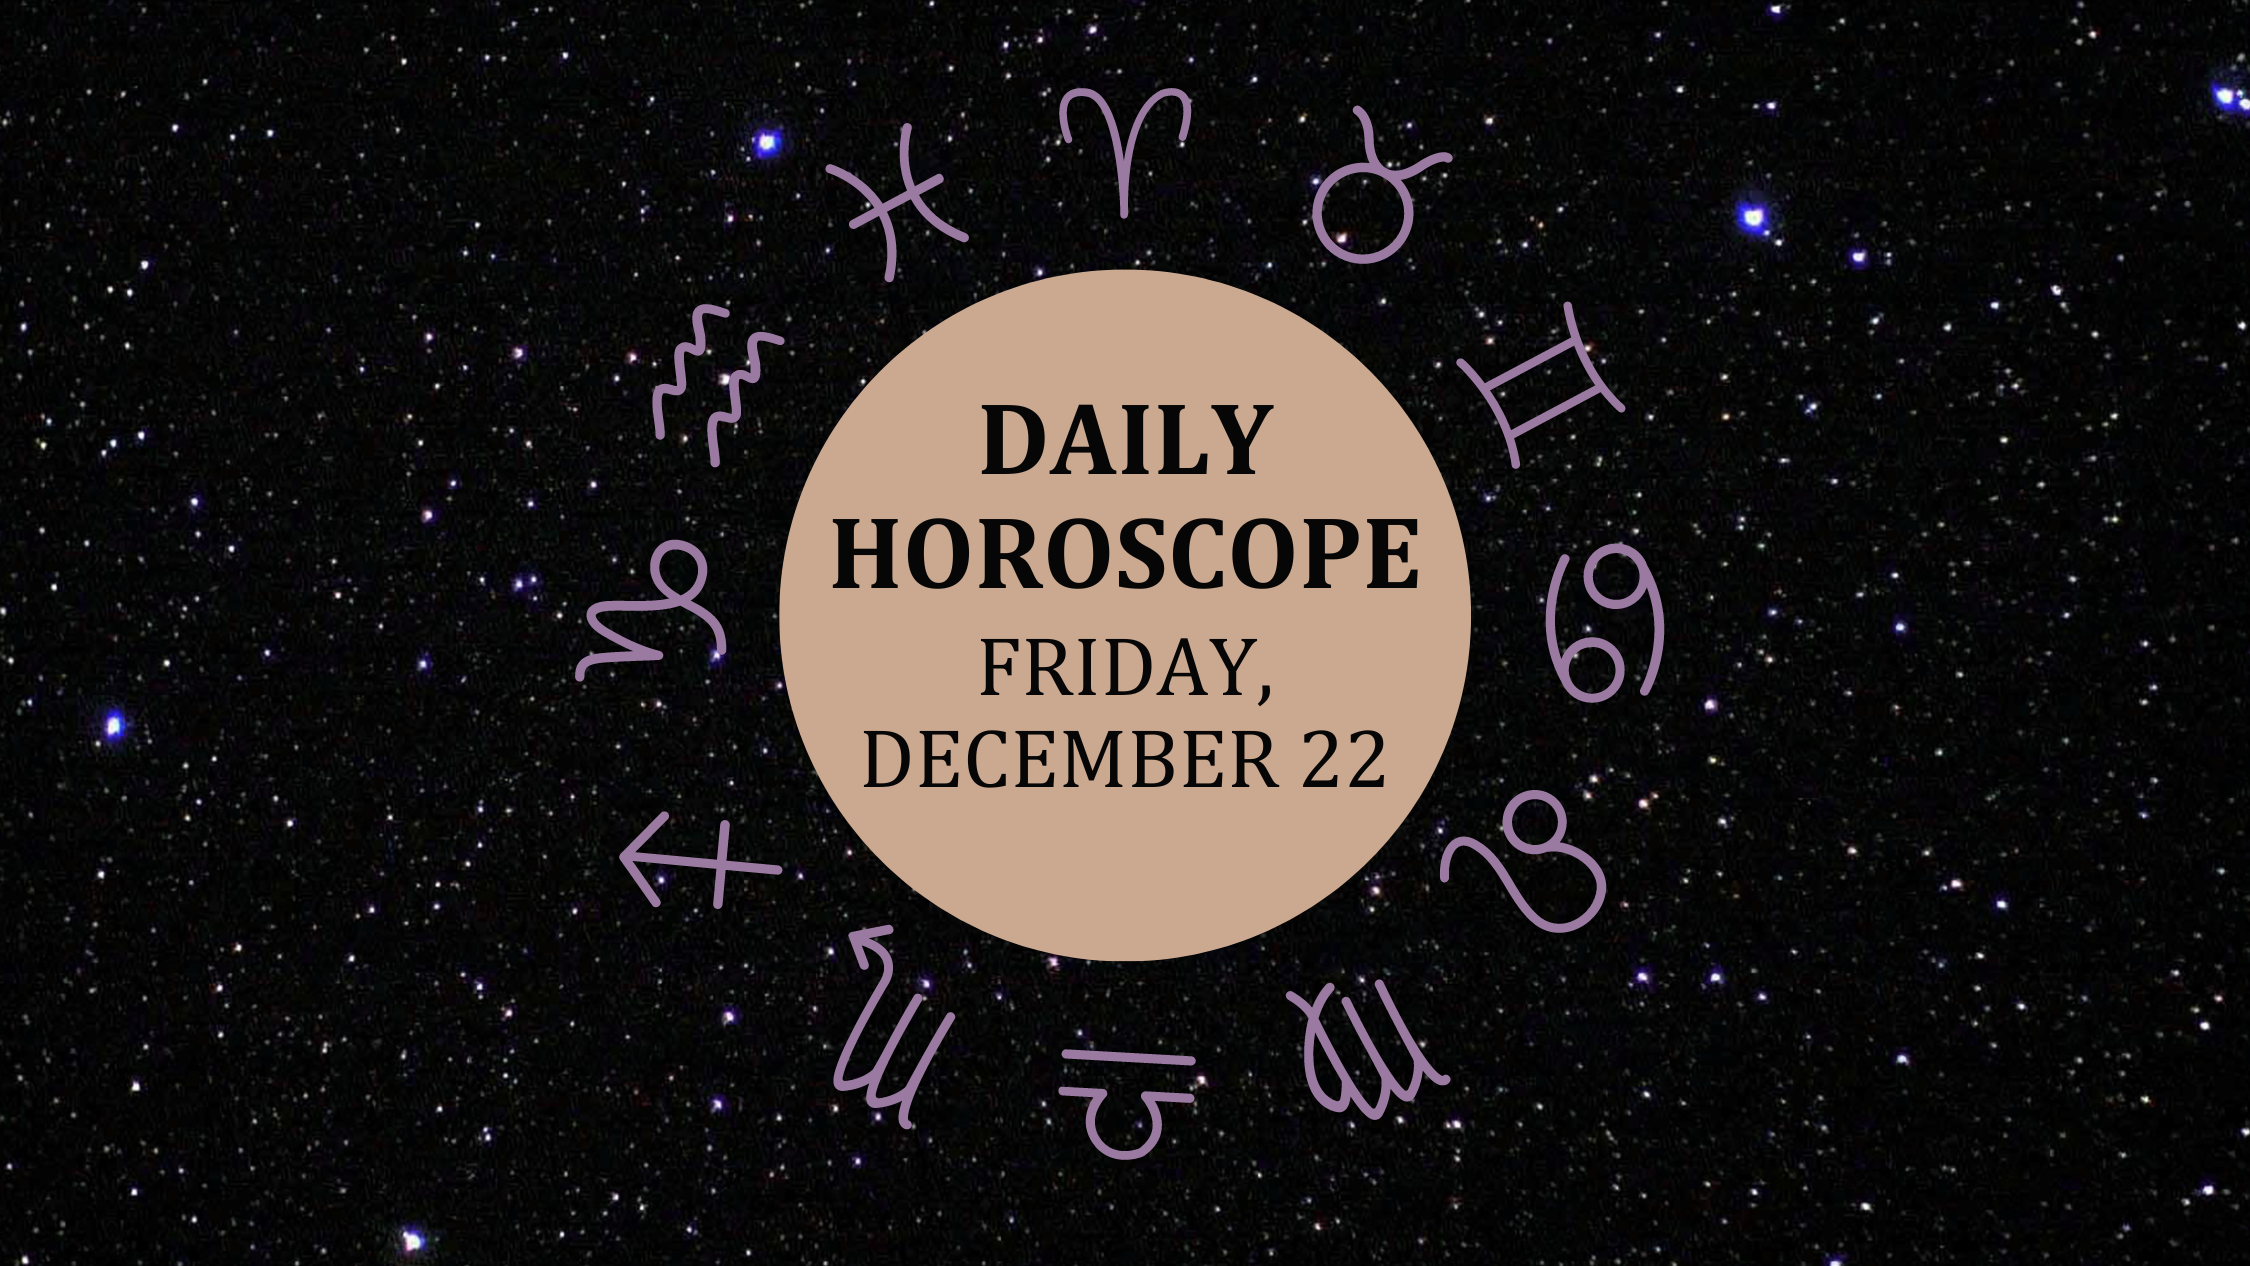 Zodiac wheel with text in the middle: "Daily Horoscope: Friday, December 22"